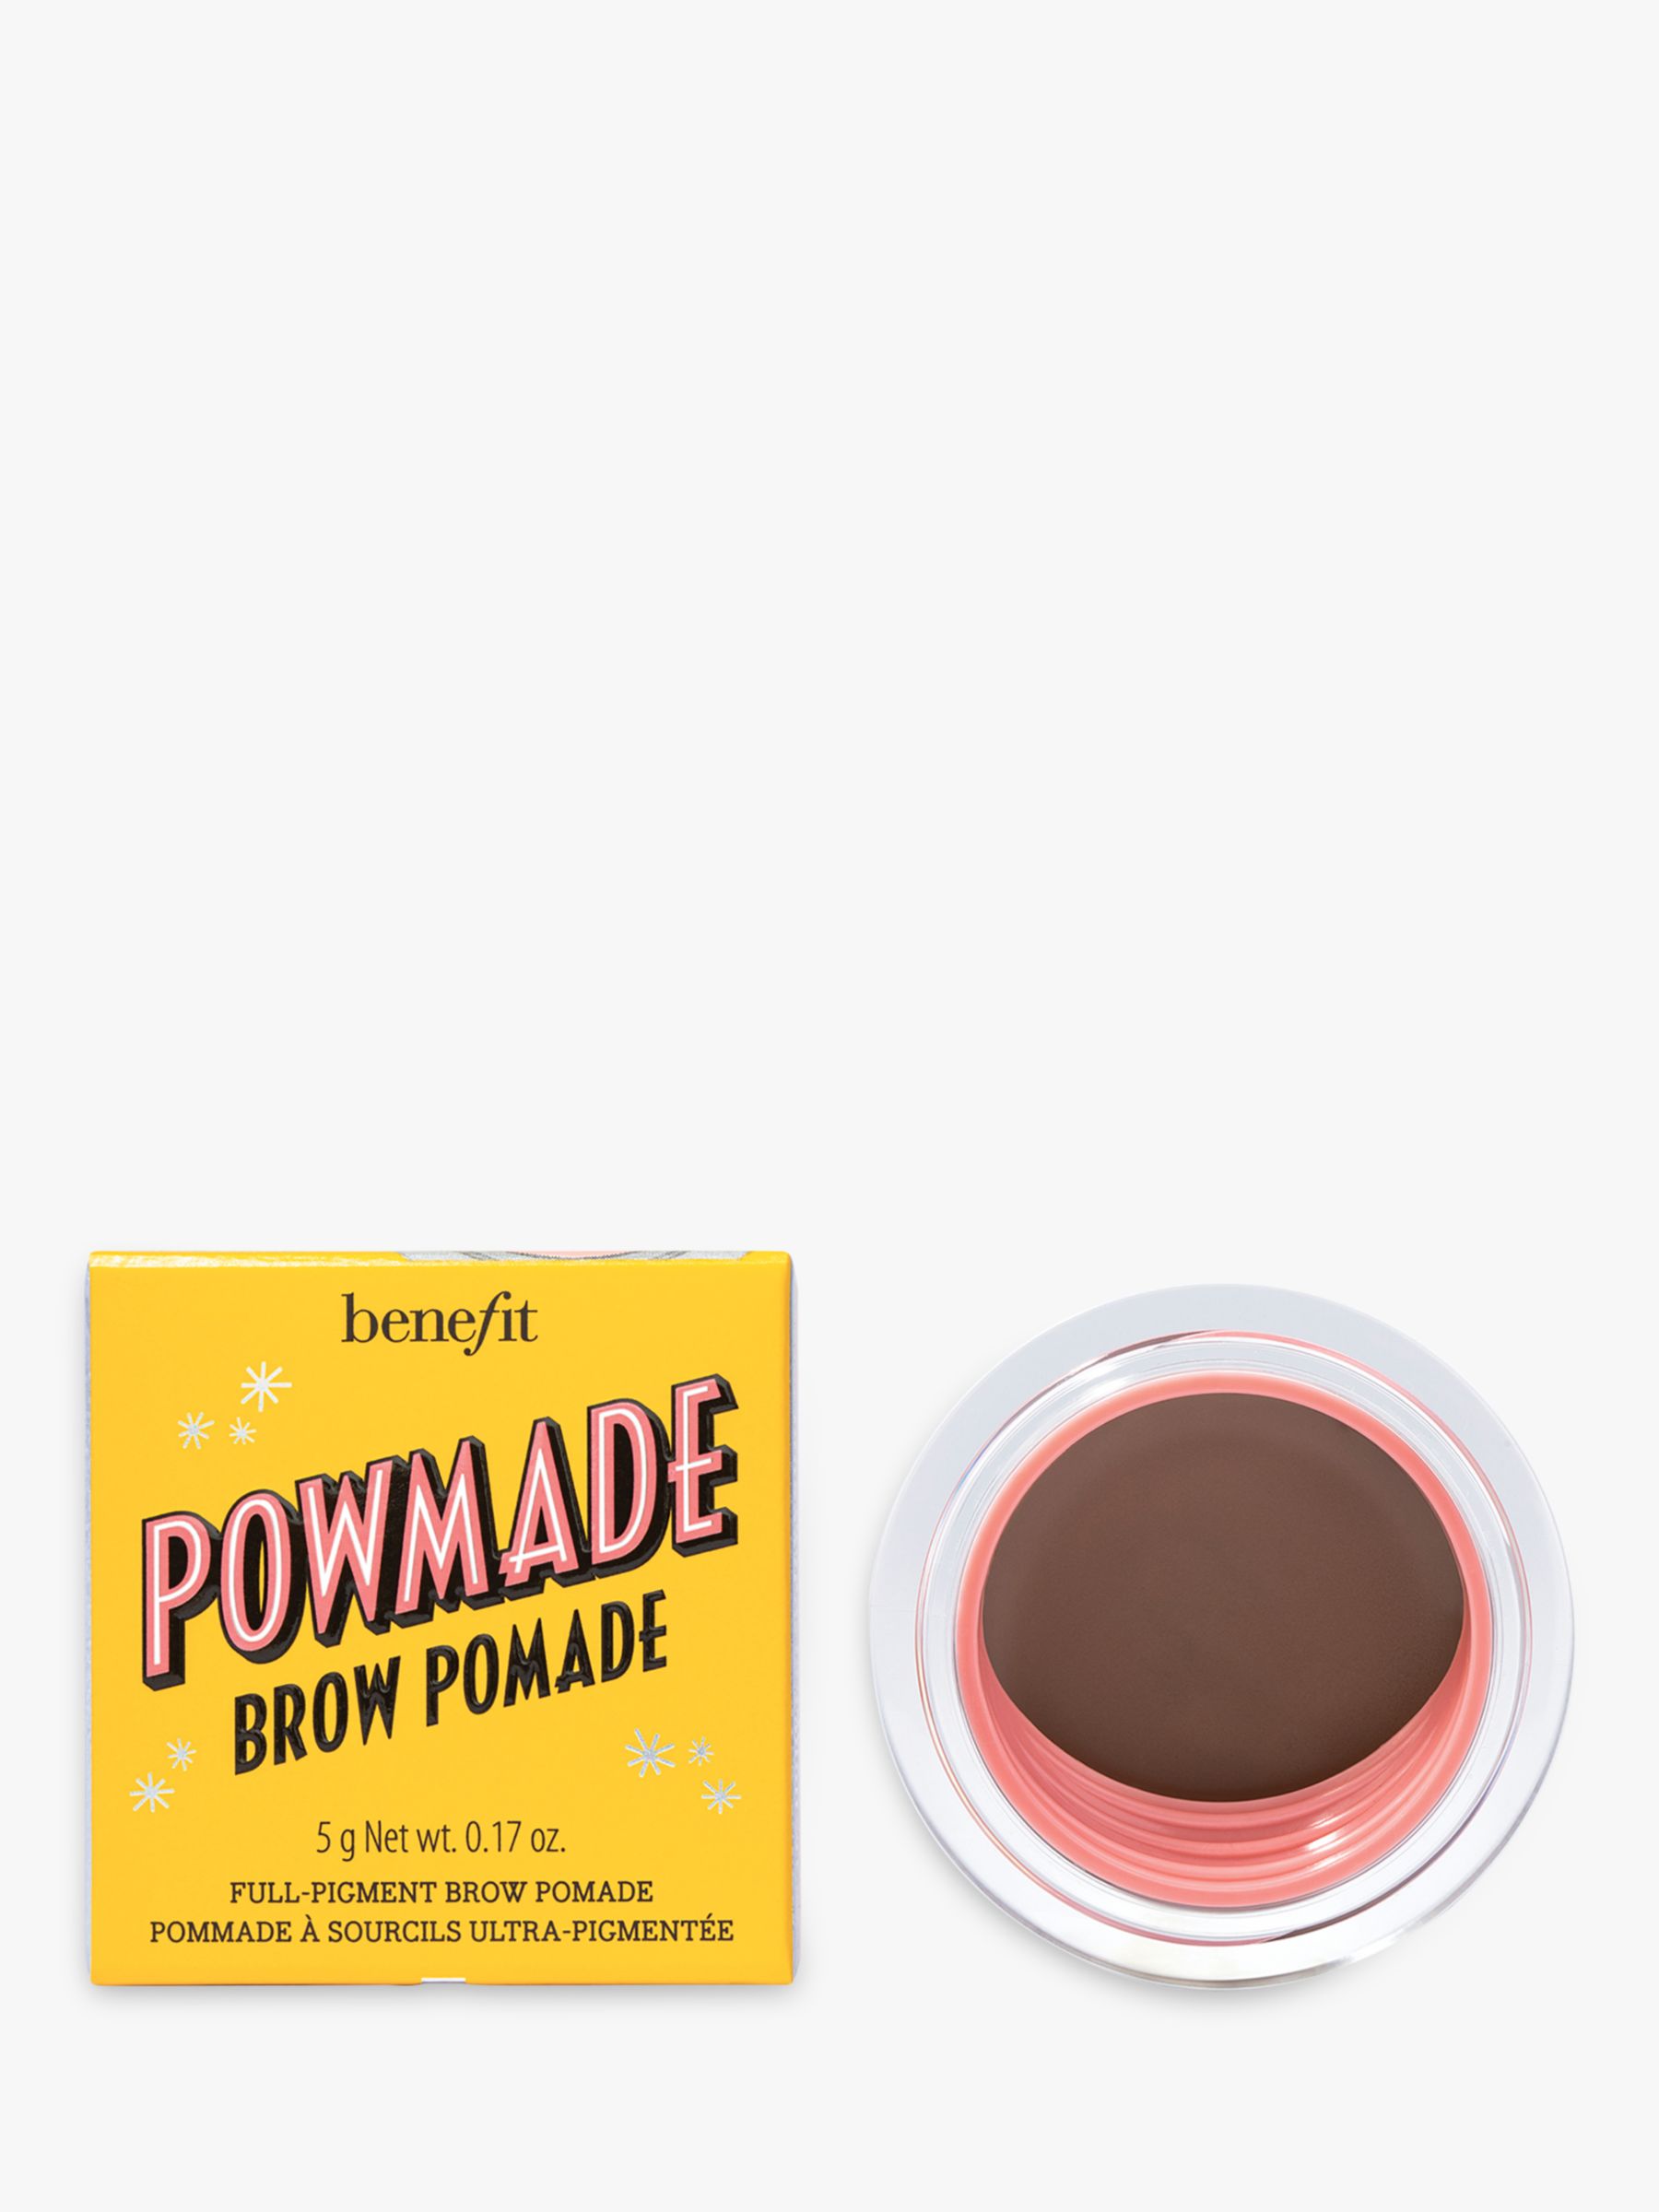 Benefit POWmade Brow Pomade Full-Pigment Brow Pomade, 02